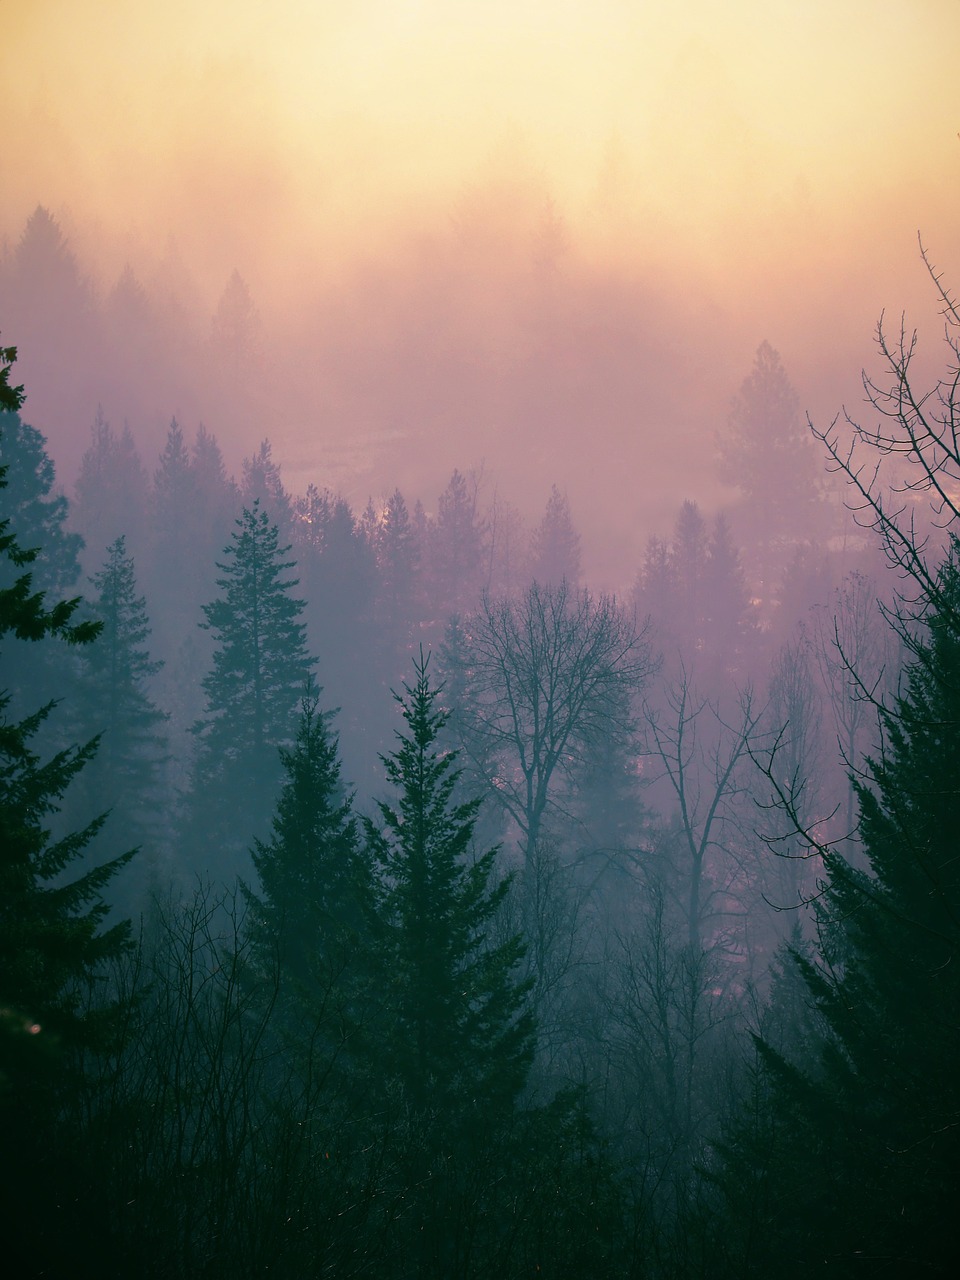 A sunset over the forest with fog - Foggy forest